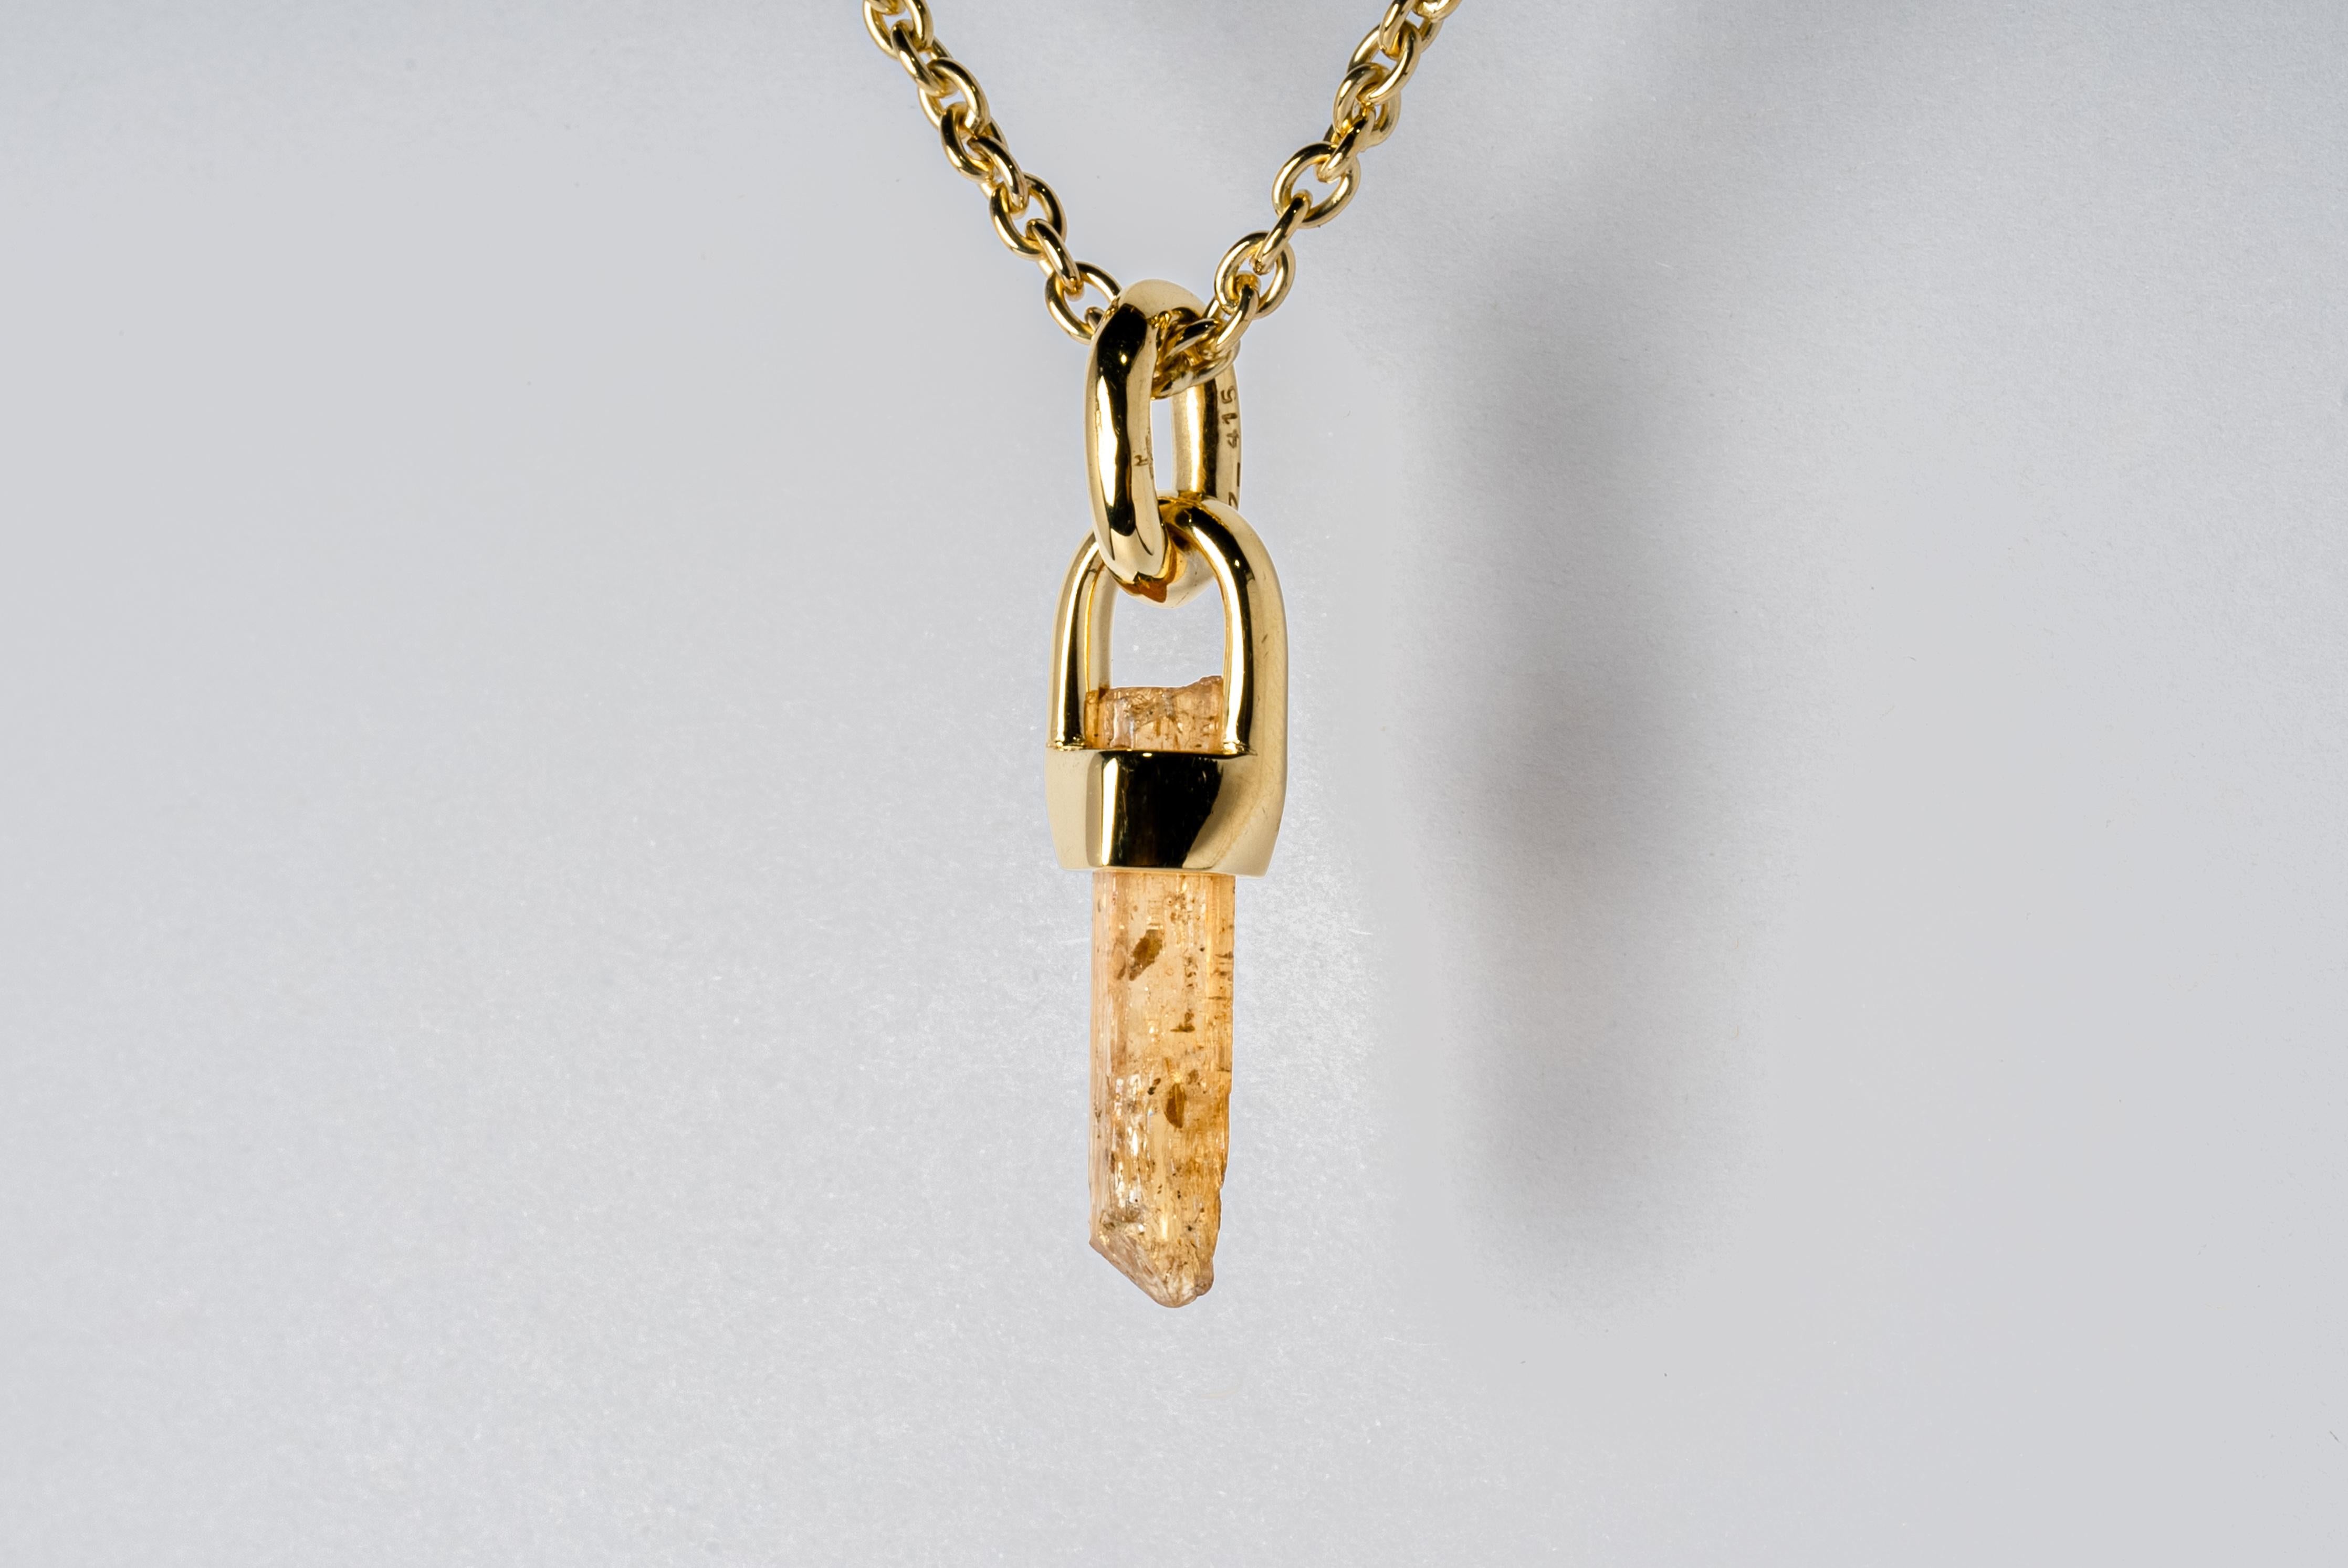 Necklace in brass with 18k gold, sterling silver with 18k gold, and a rough of imperial topaz. The Talisman series is an exploration into the power of natural crystals. Tools for Magic. The crystals used in these pieces are discovered through